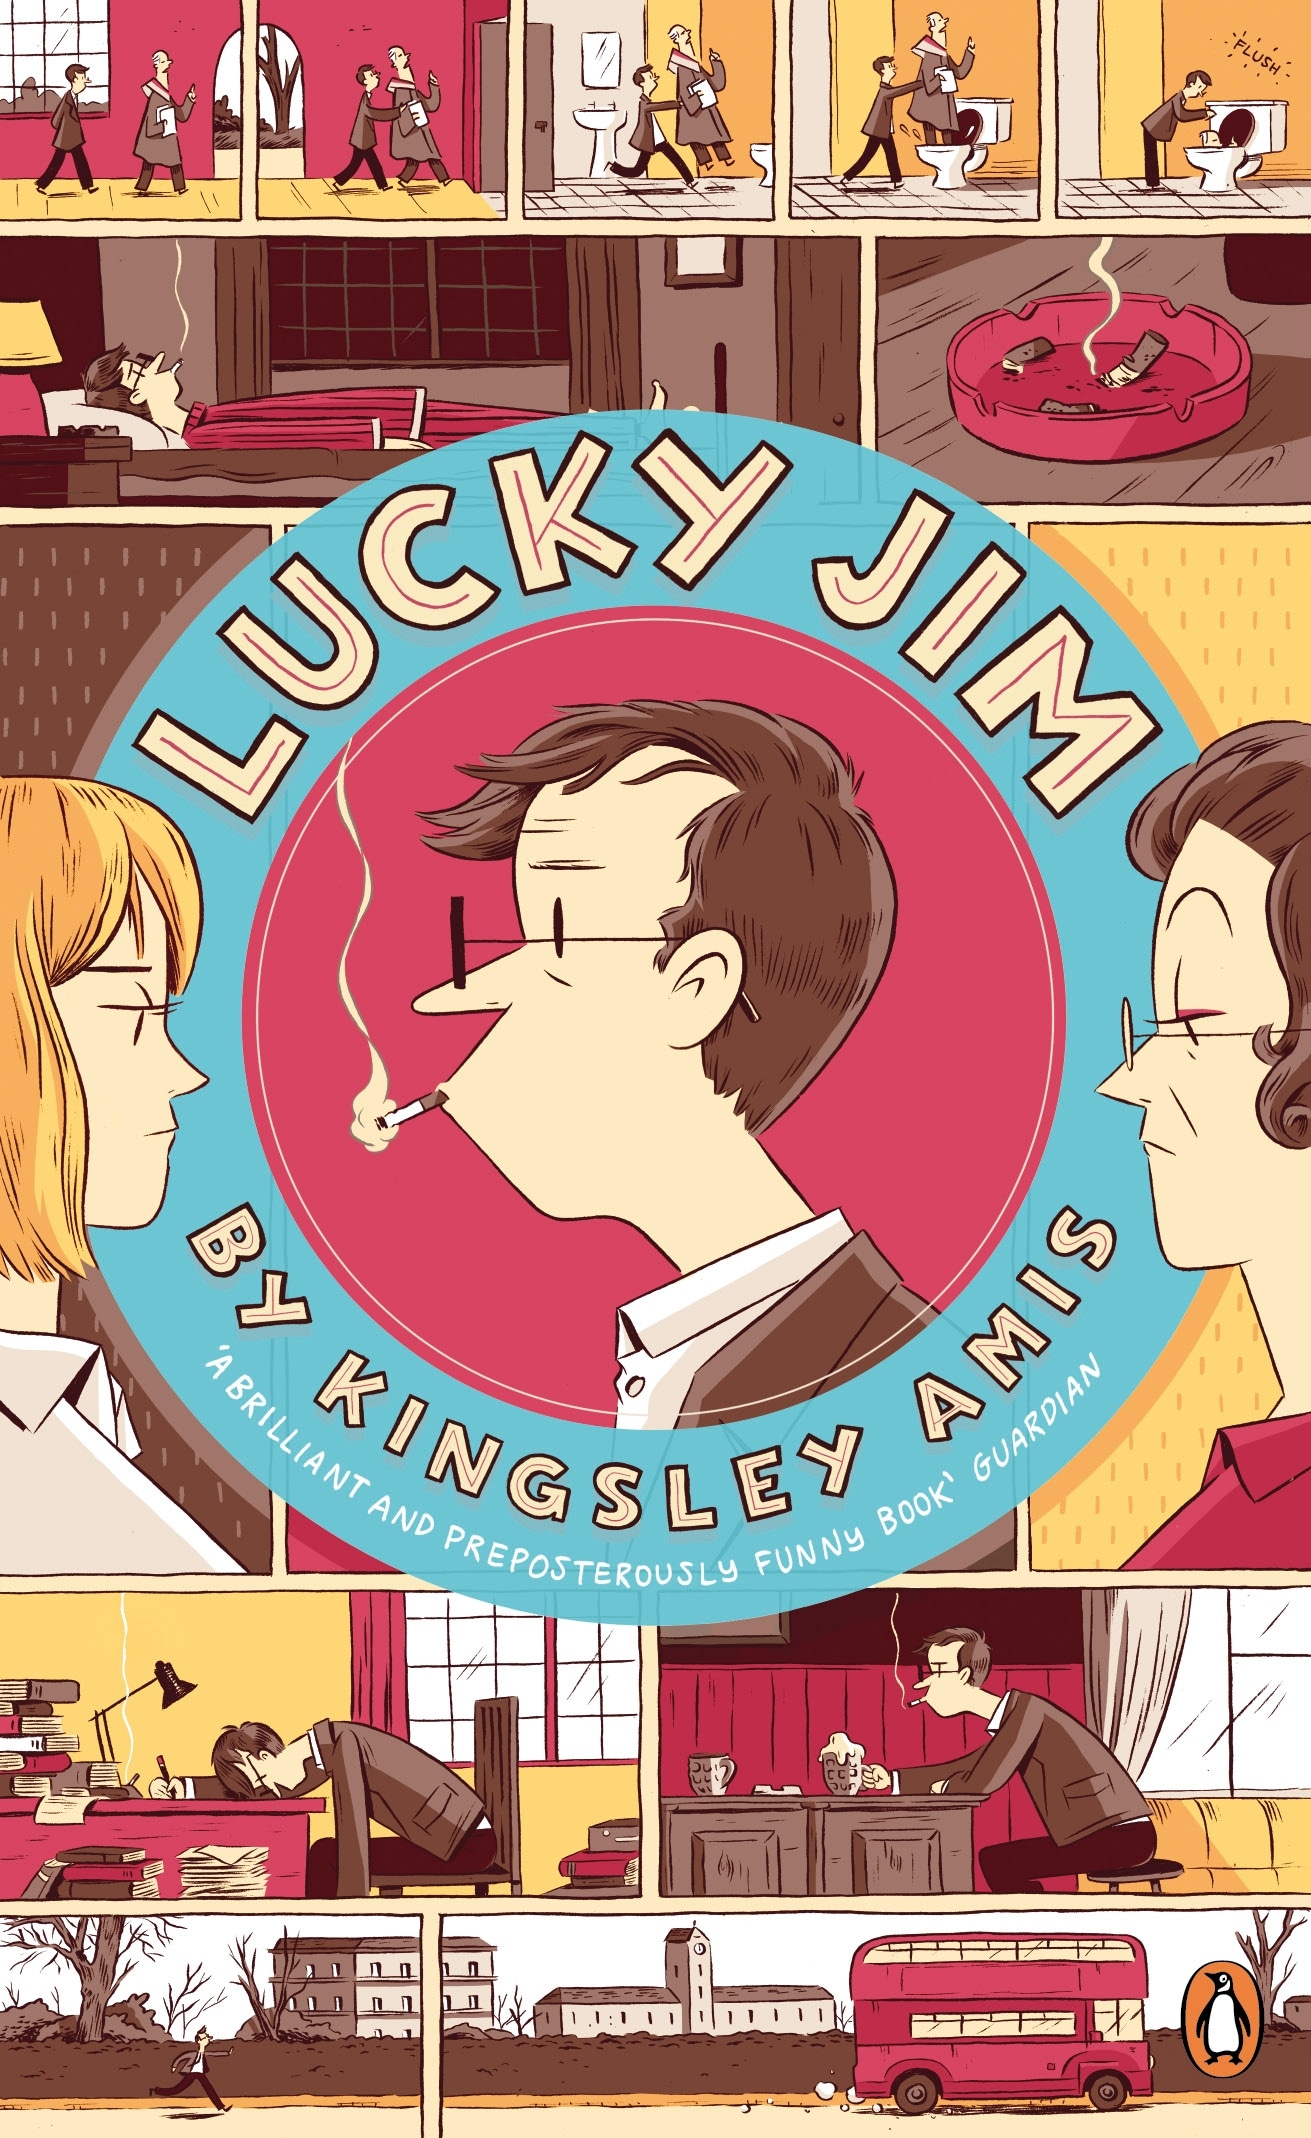 Book “Lucky Jim” by Kingsley Amis — April 5, 2012